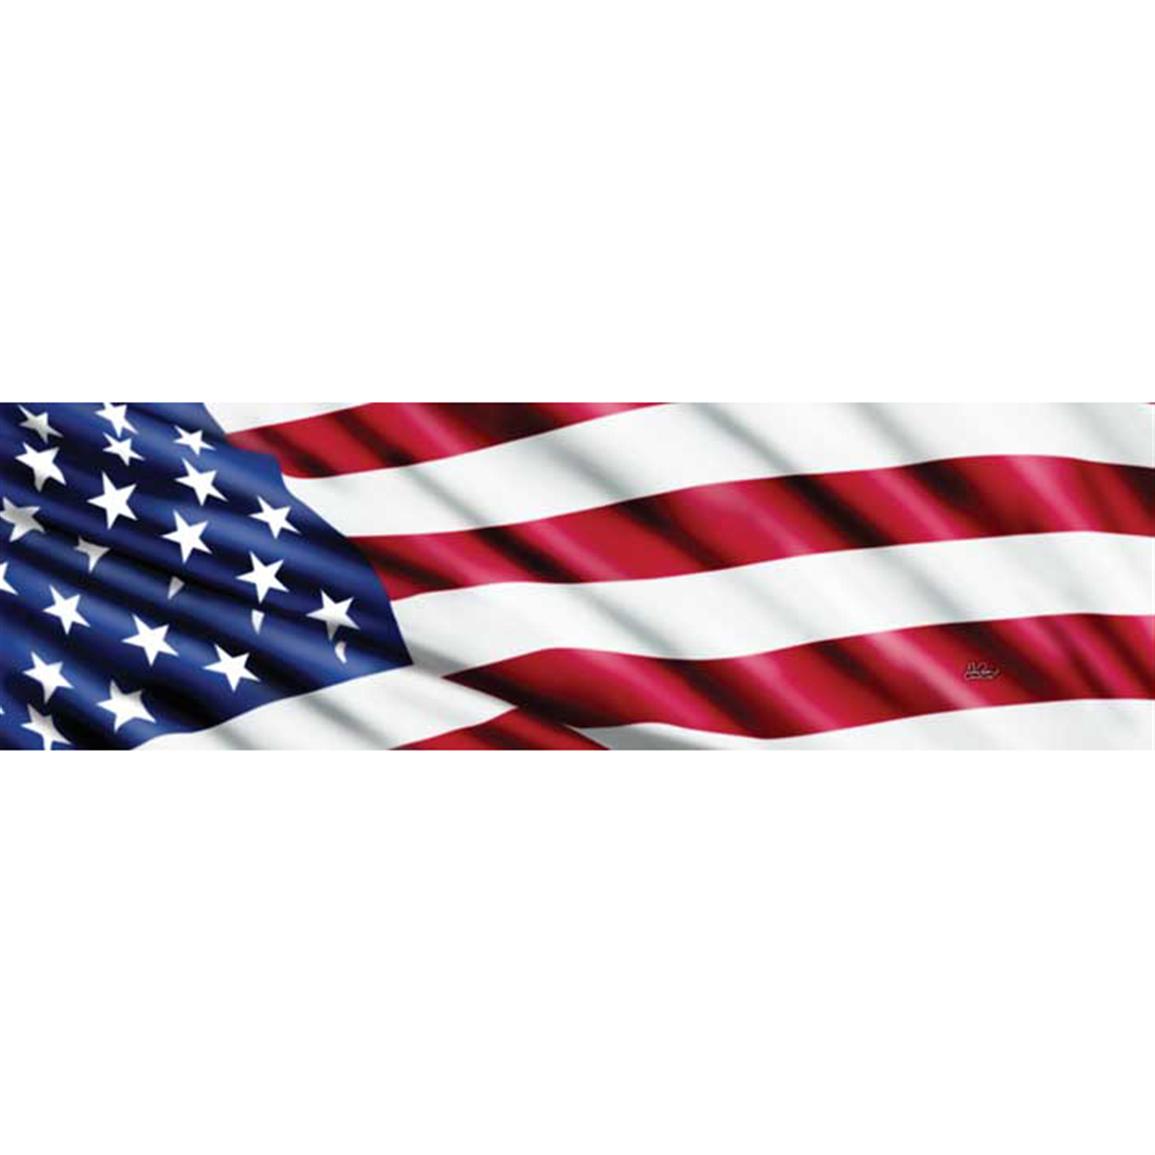 Free America Banner Cliparts, Download Free Clip Art, Free